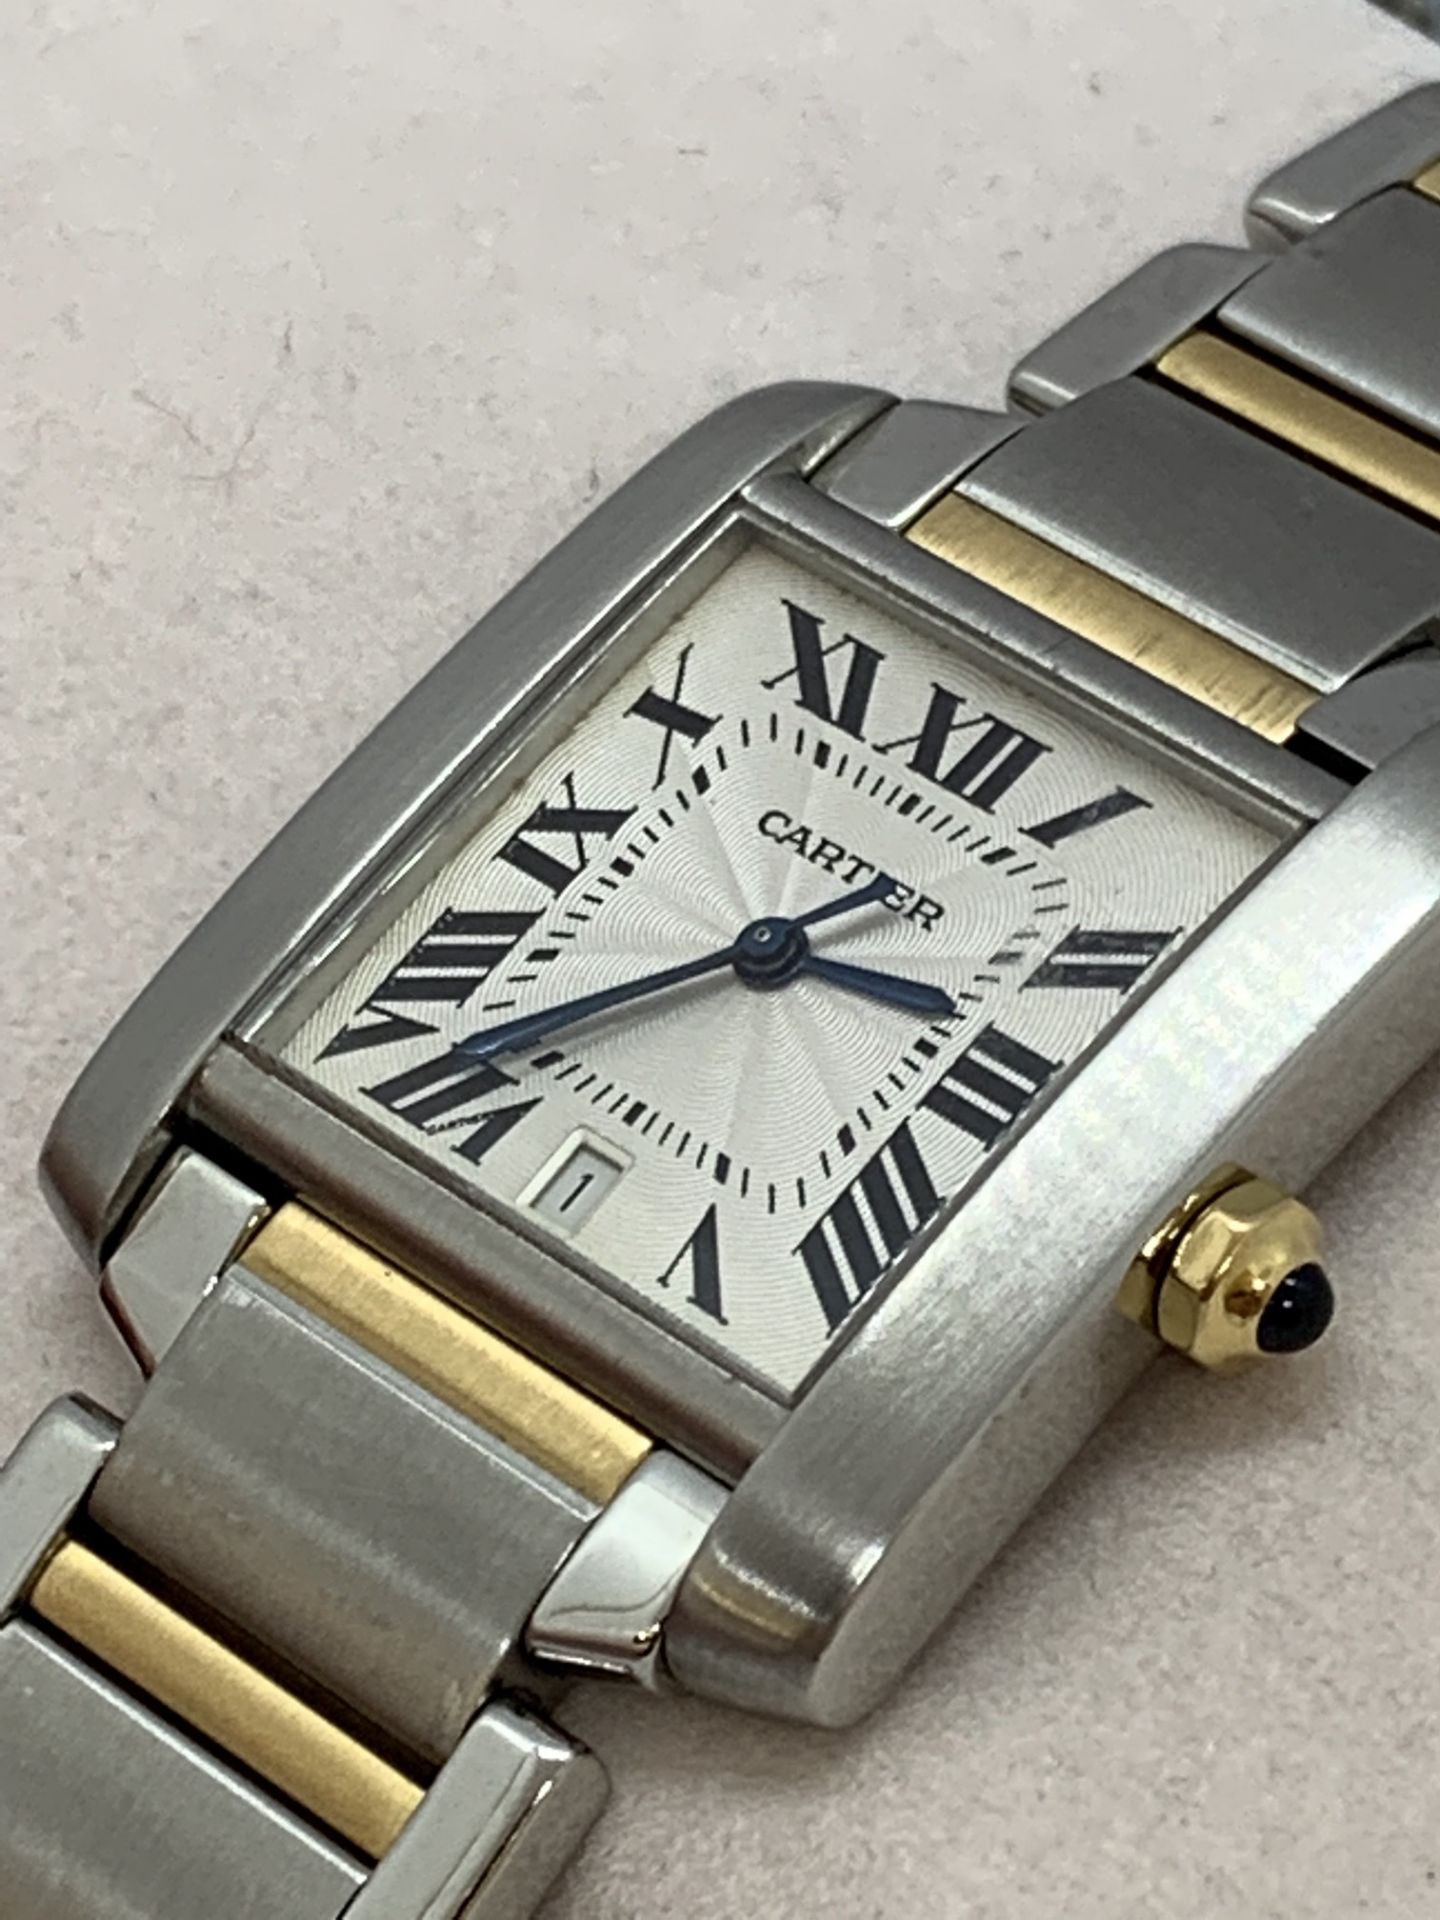 Cartier Steel & Gold Large Tank Française, 2302, Automatic - Image 2 of 7